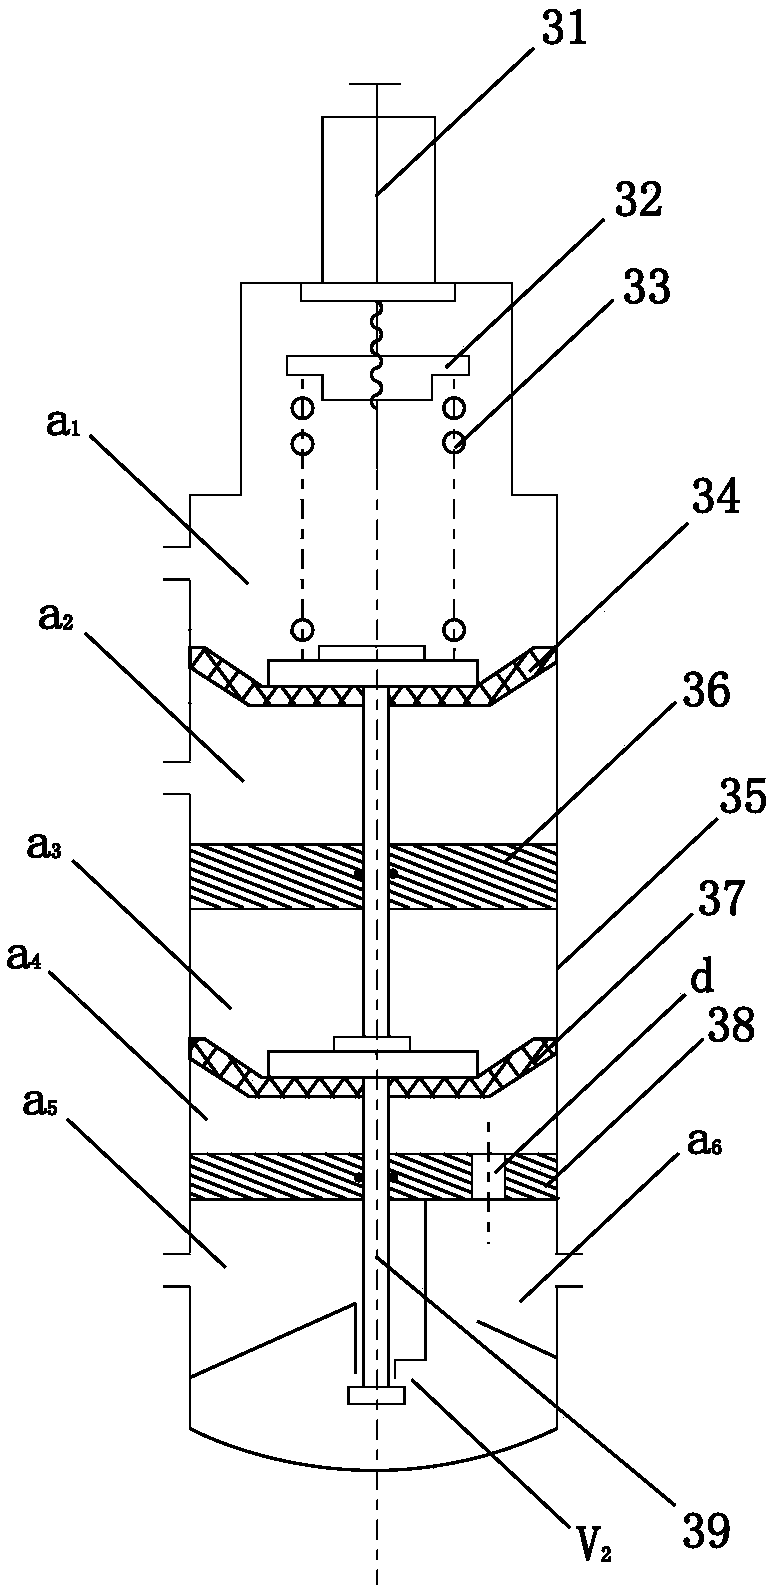 Novel reducing valve with output pressure responding to flow changes